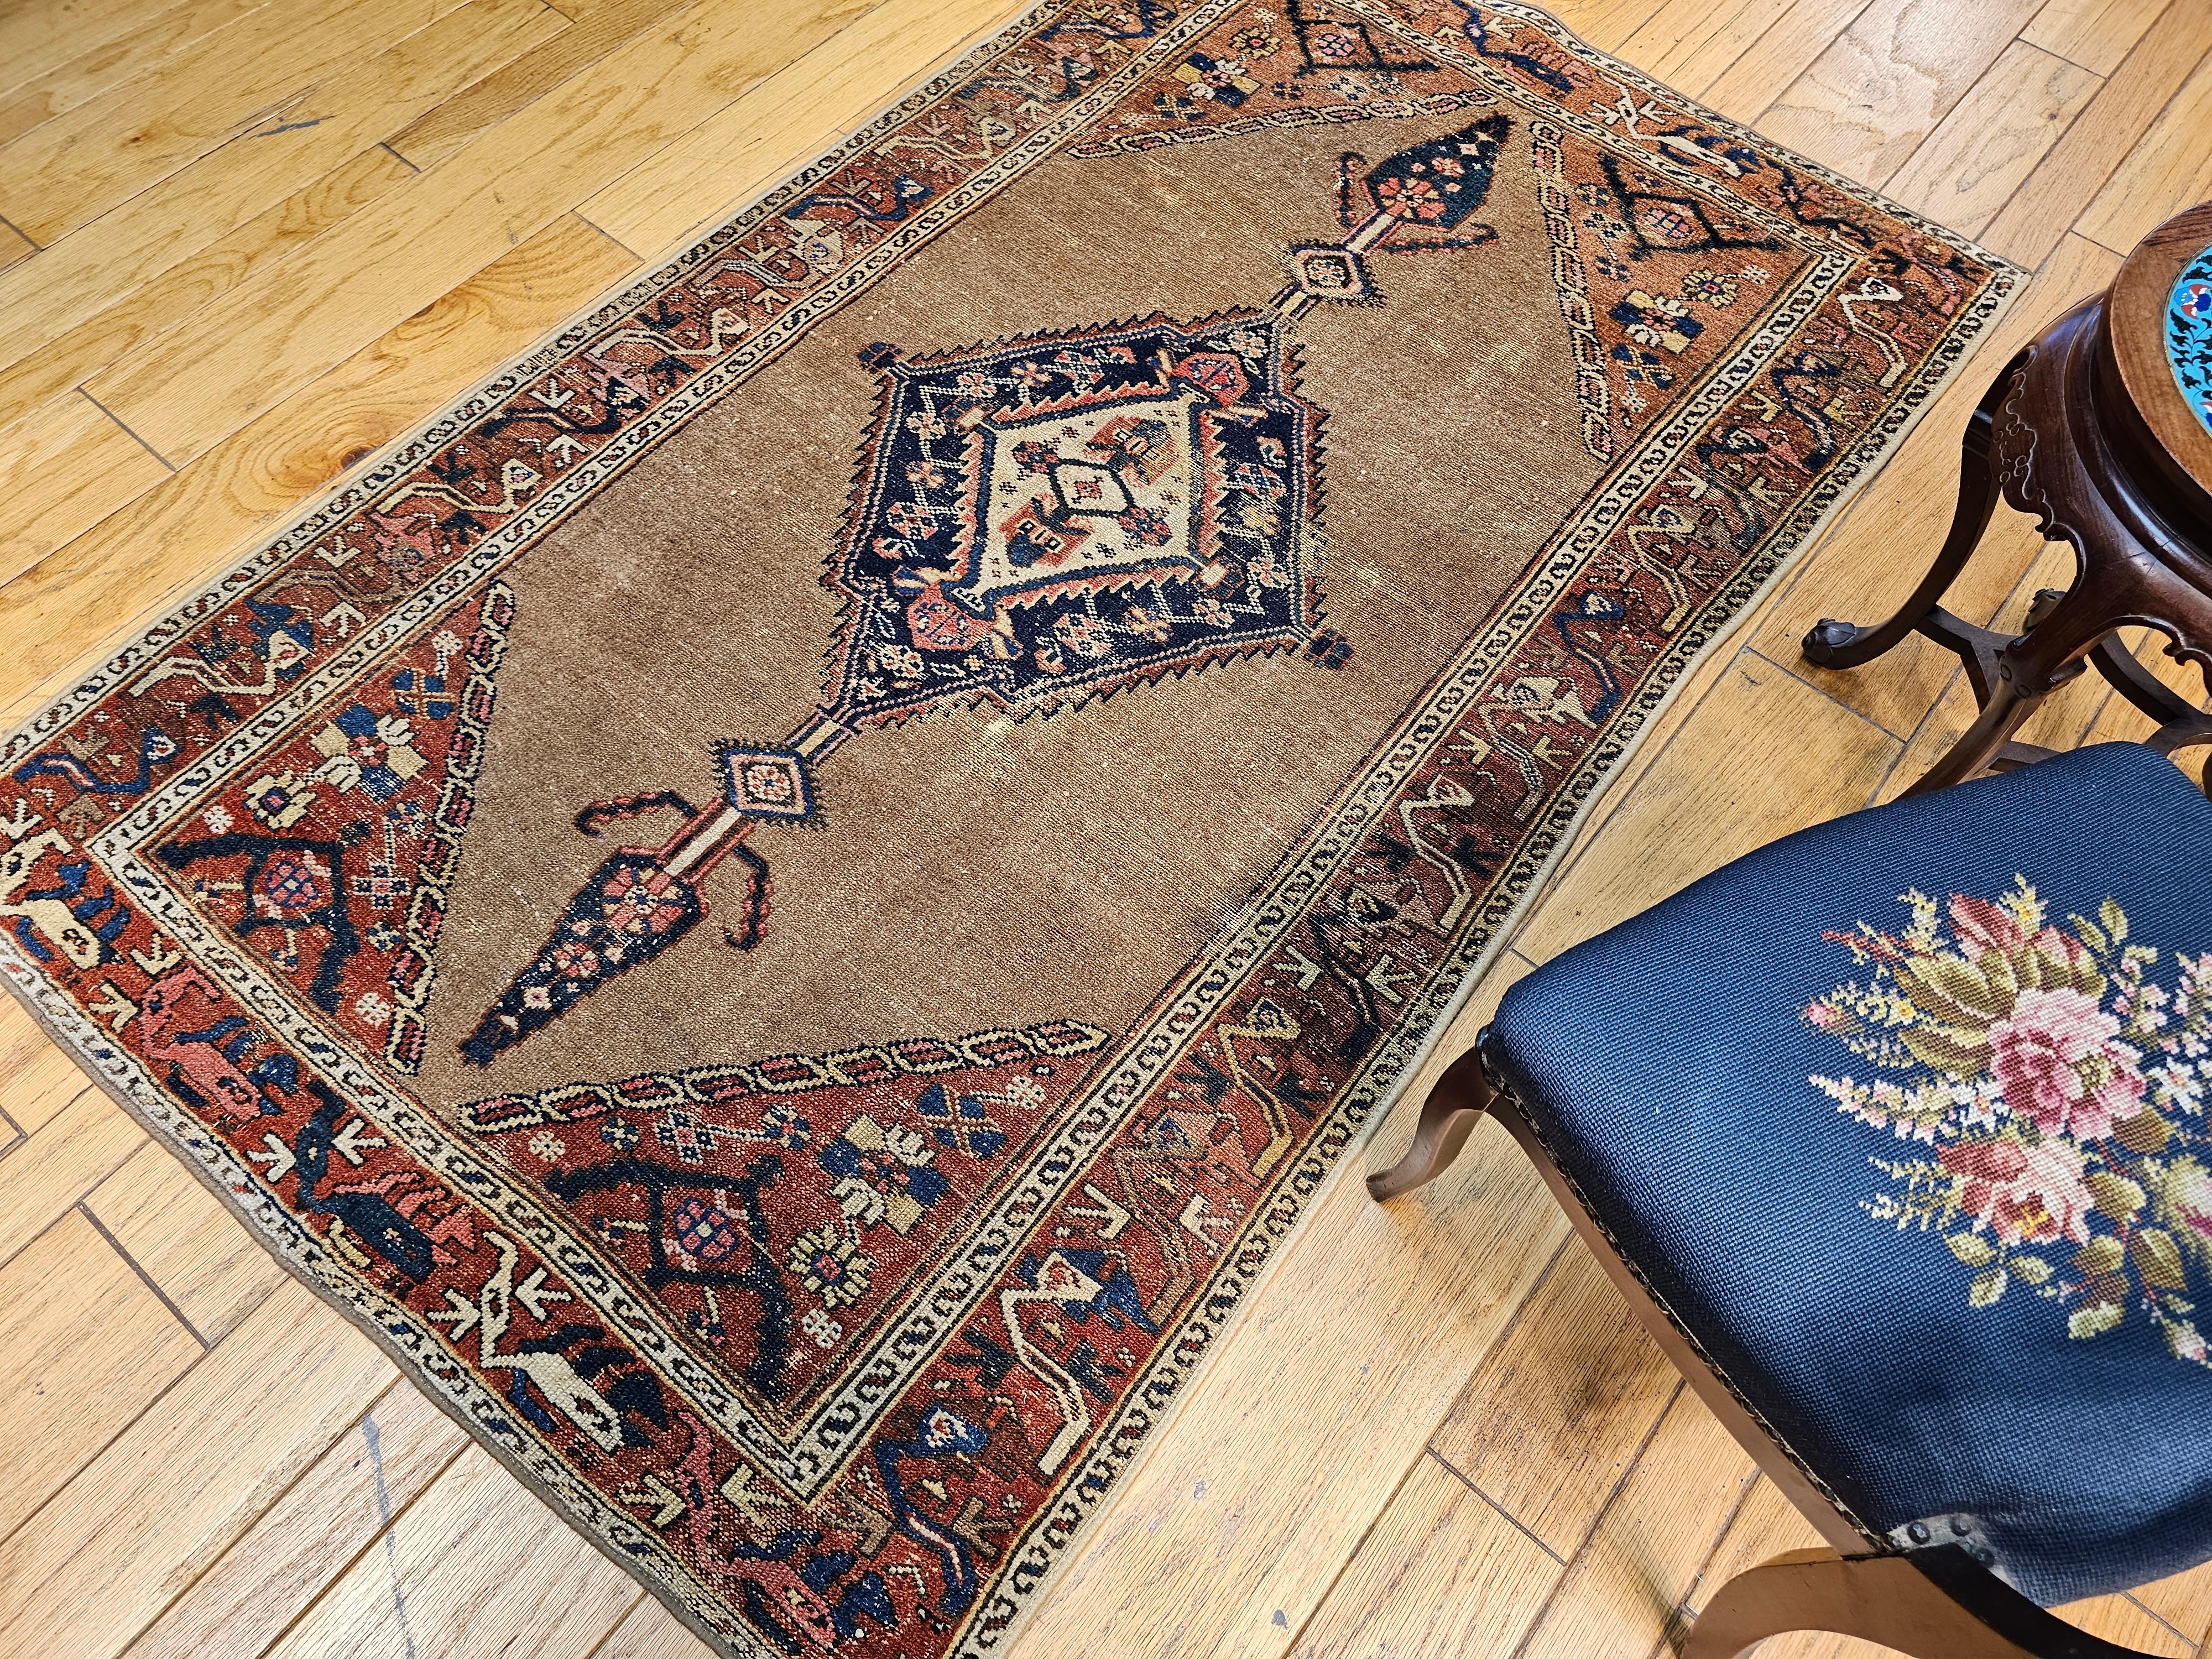 Vintage Persian Camelhair Malayer Area Rug in Camel, Navy, Ivory, Rust Red, Blue For Sale 9